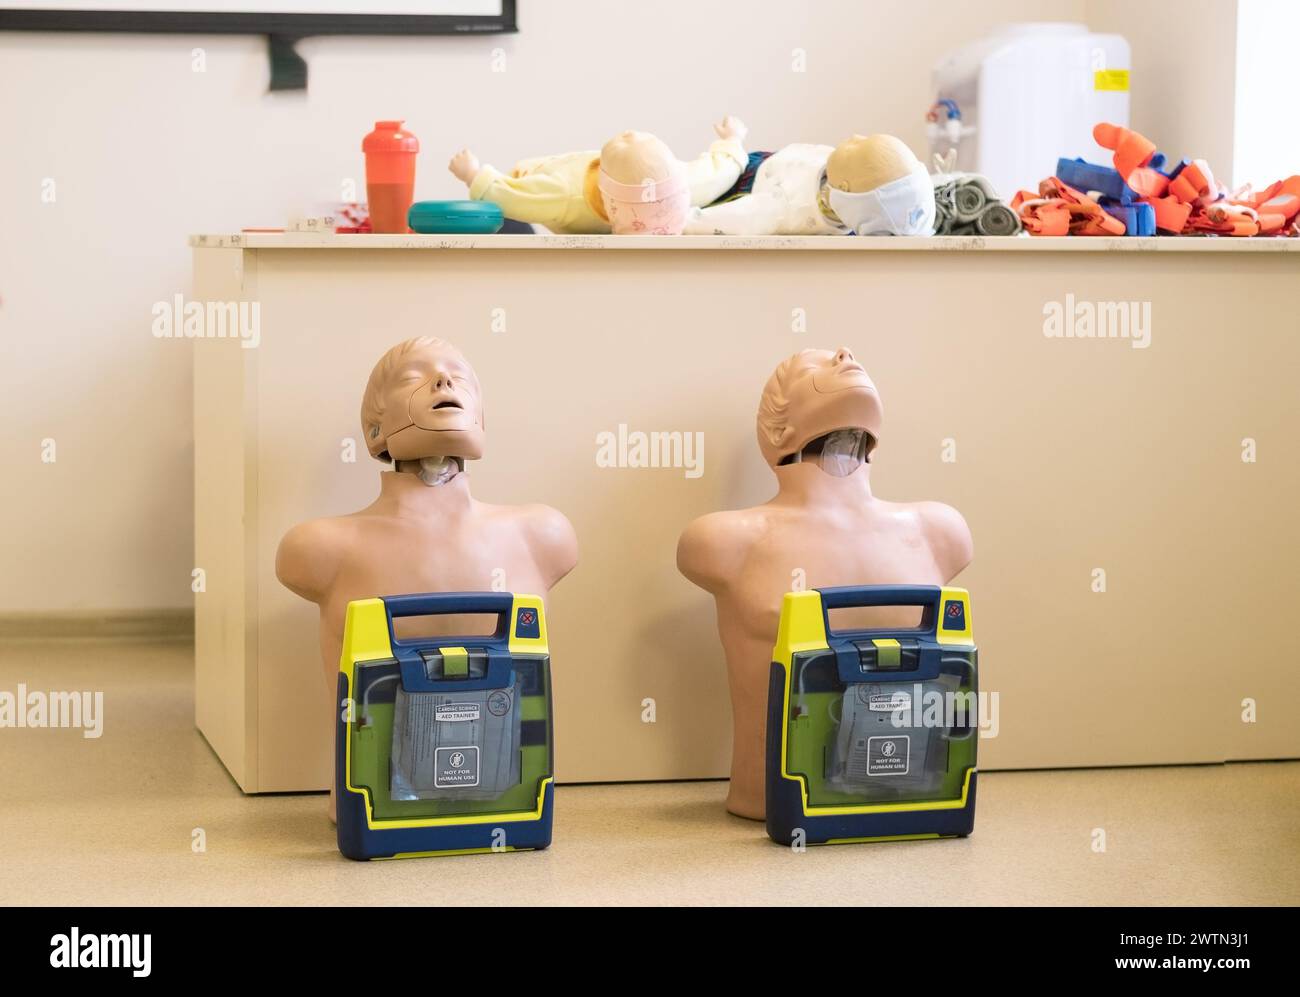 Manikin for demonstration of CPR Cardiopulmonary resuscitation for resurrected patients and Automated External Defibrillator. Stock Photo